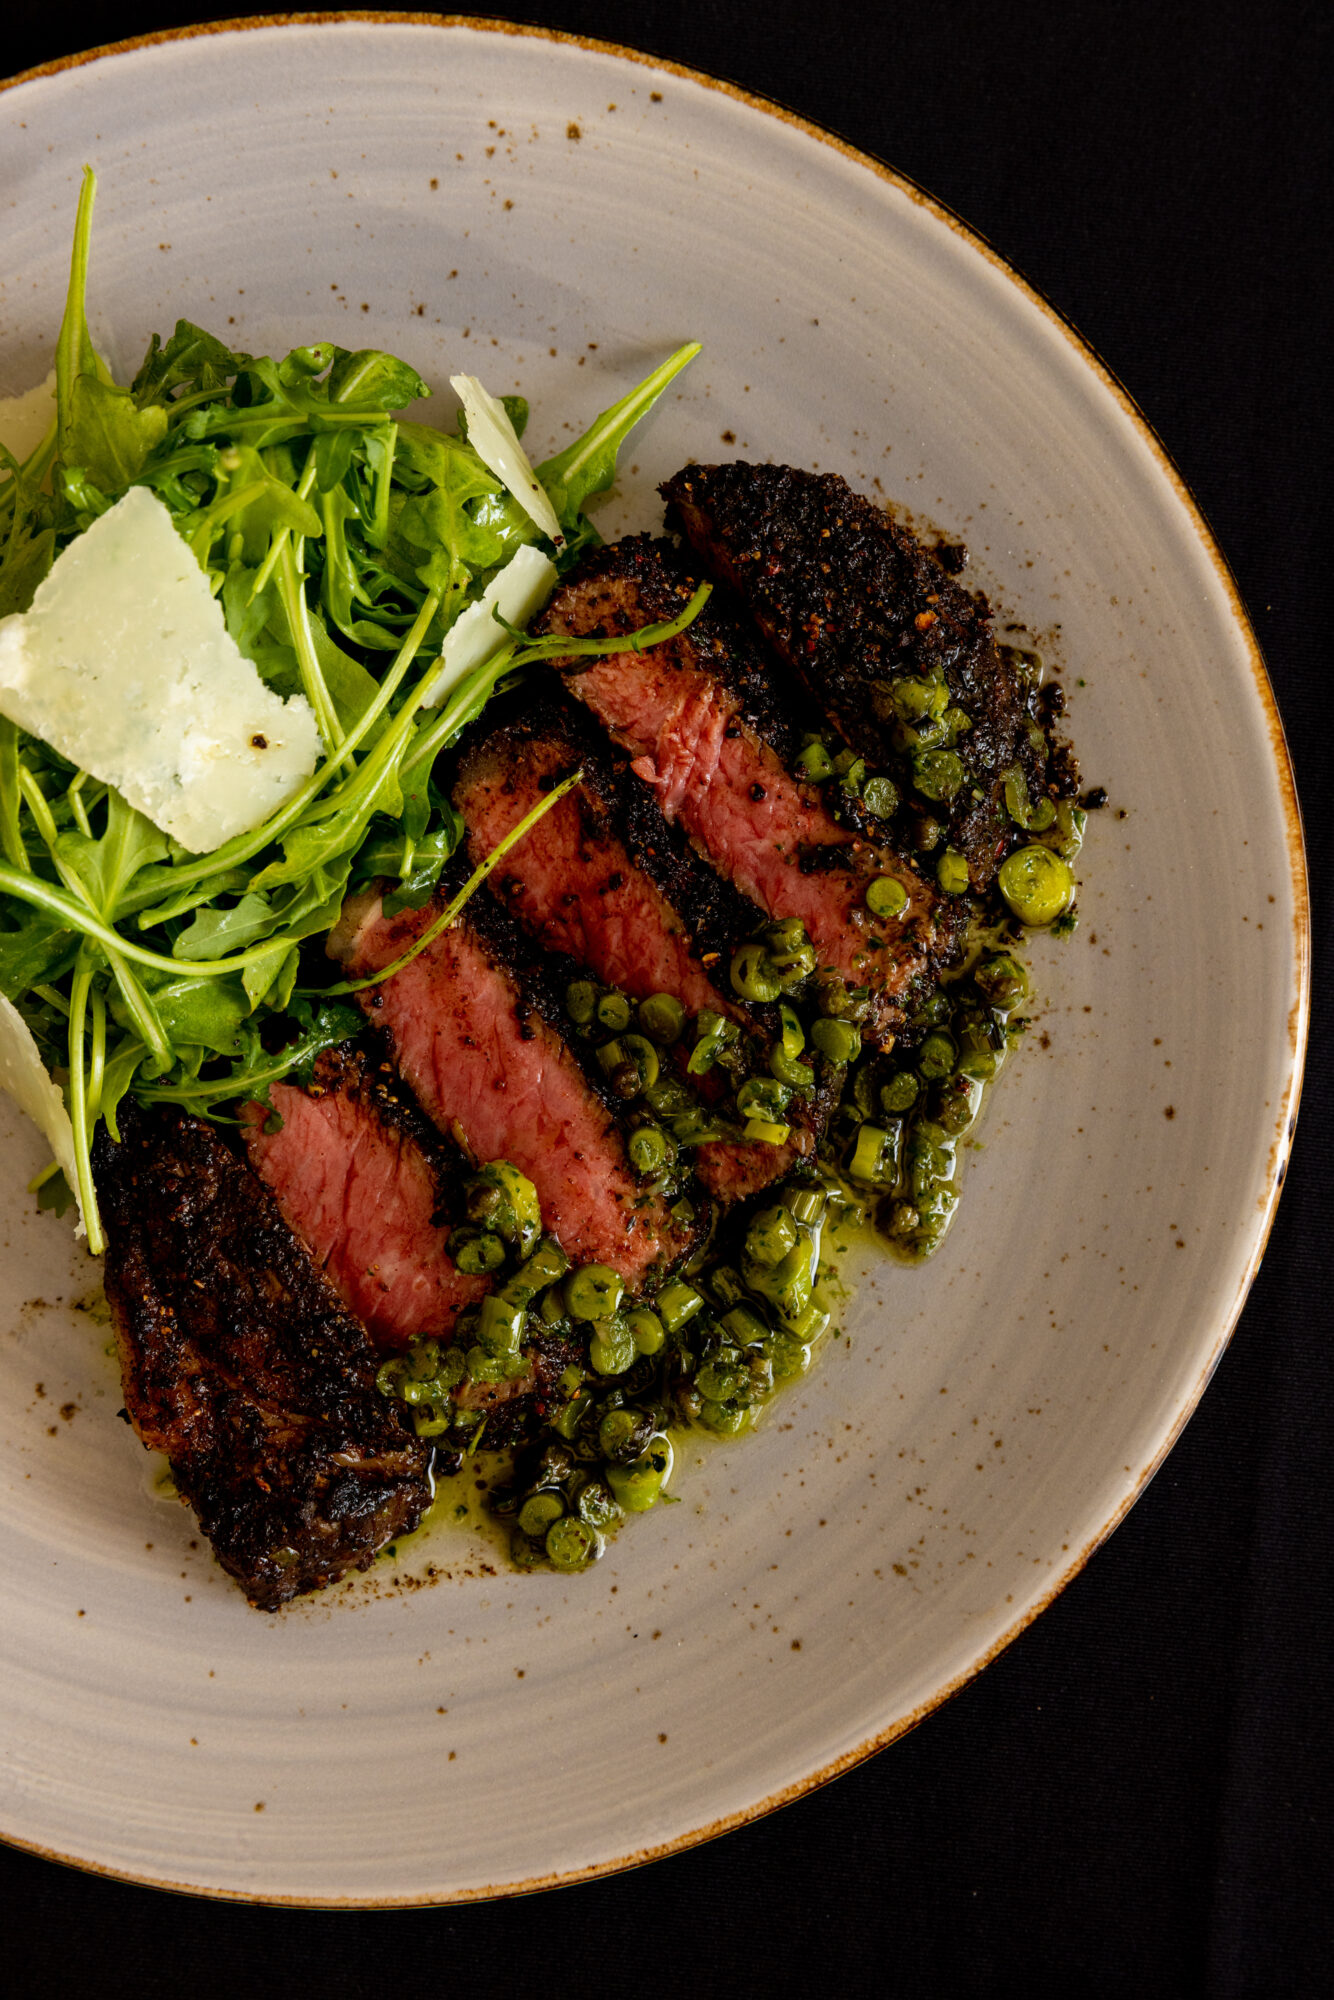 TheCliff_Porcini Rubbed Wagyu Striploin served with Green Garlic, Salsa Verde.jpg